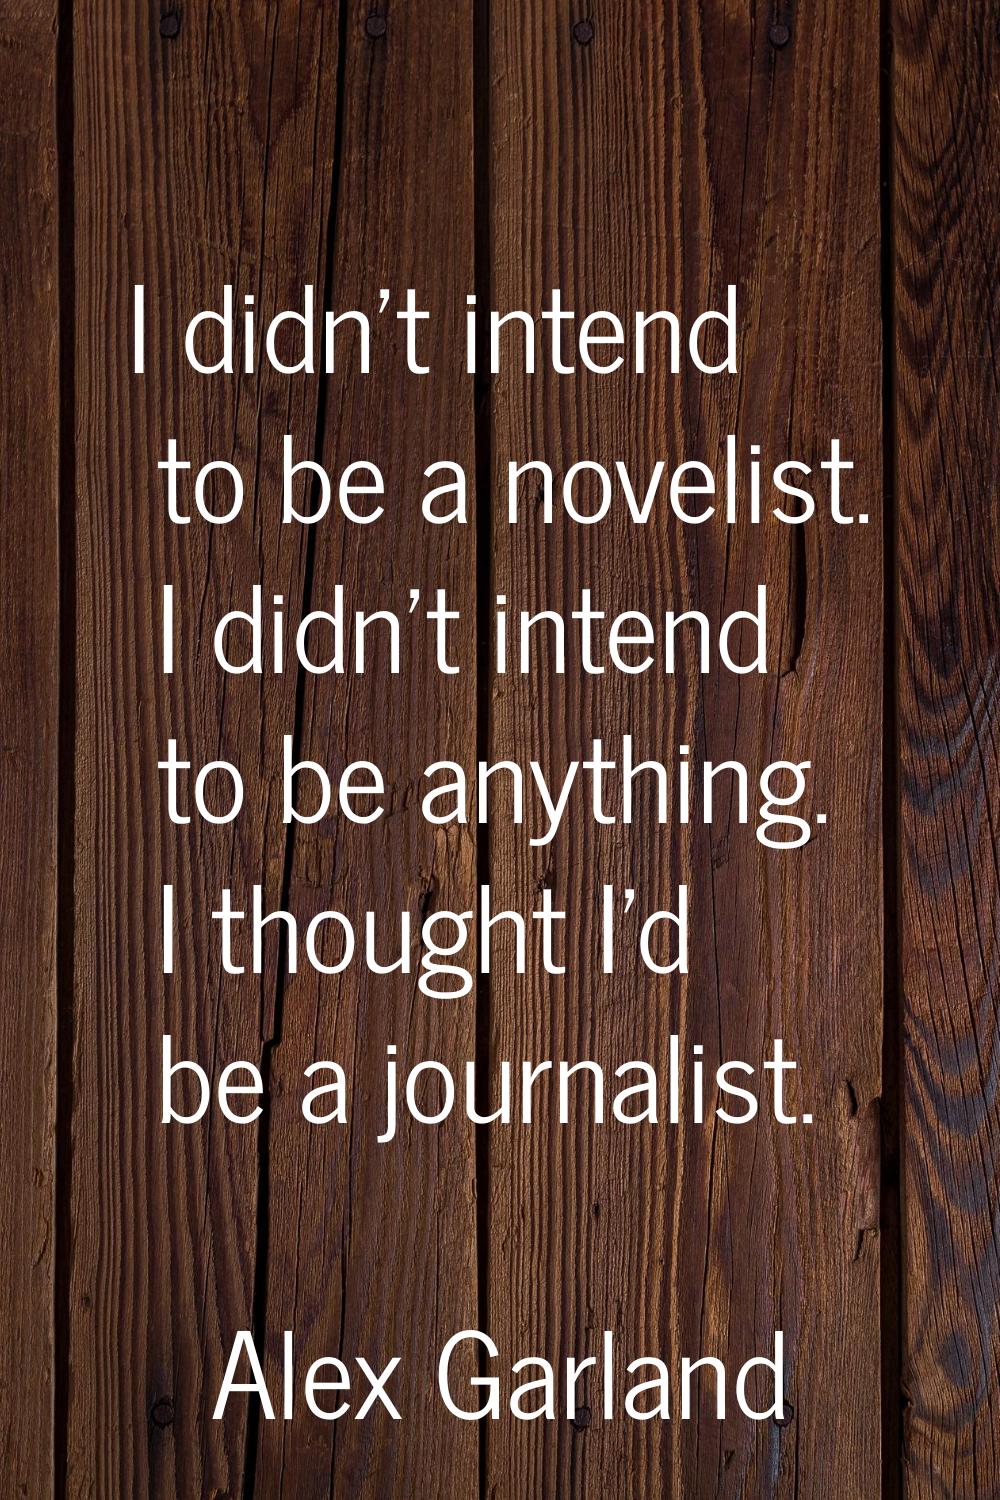 I didn't intend to be a novelist. I didn't intend to be anything. I thought I'd be a journalist.